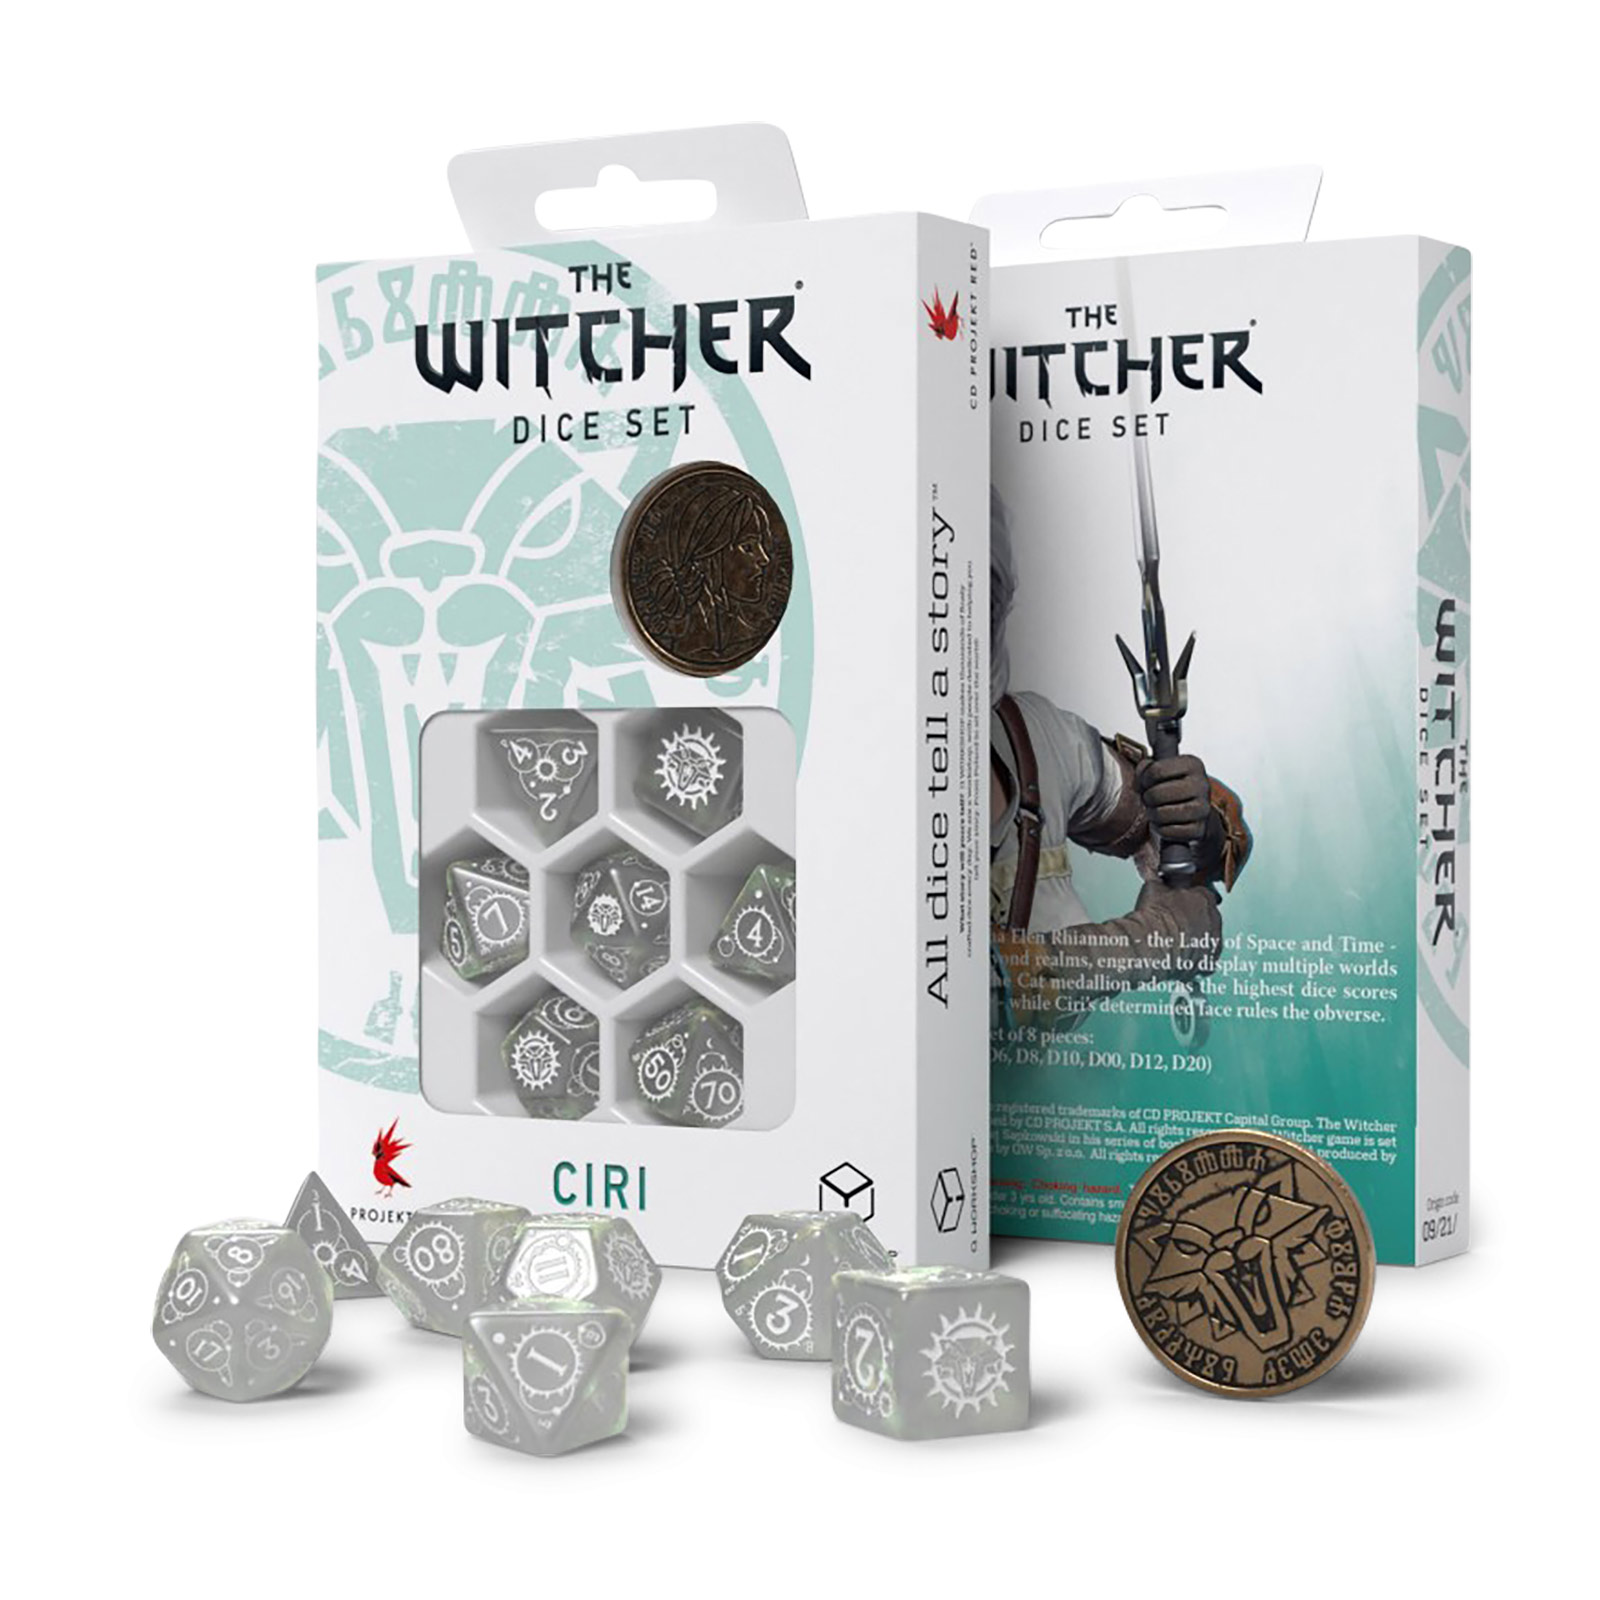 Witcher - Ciri Lady of Space & Time RPG Dice Set 7pcs with Collector's Coin